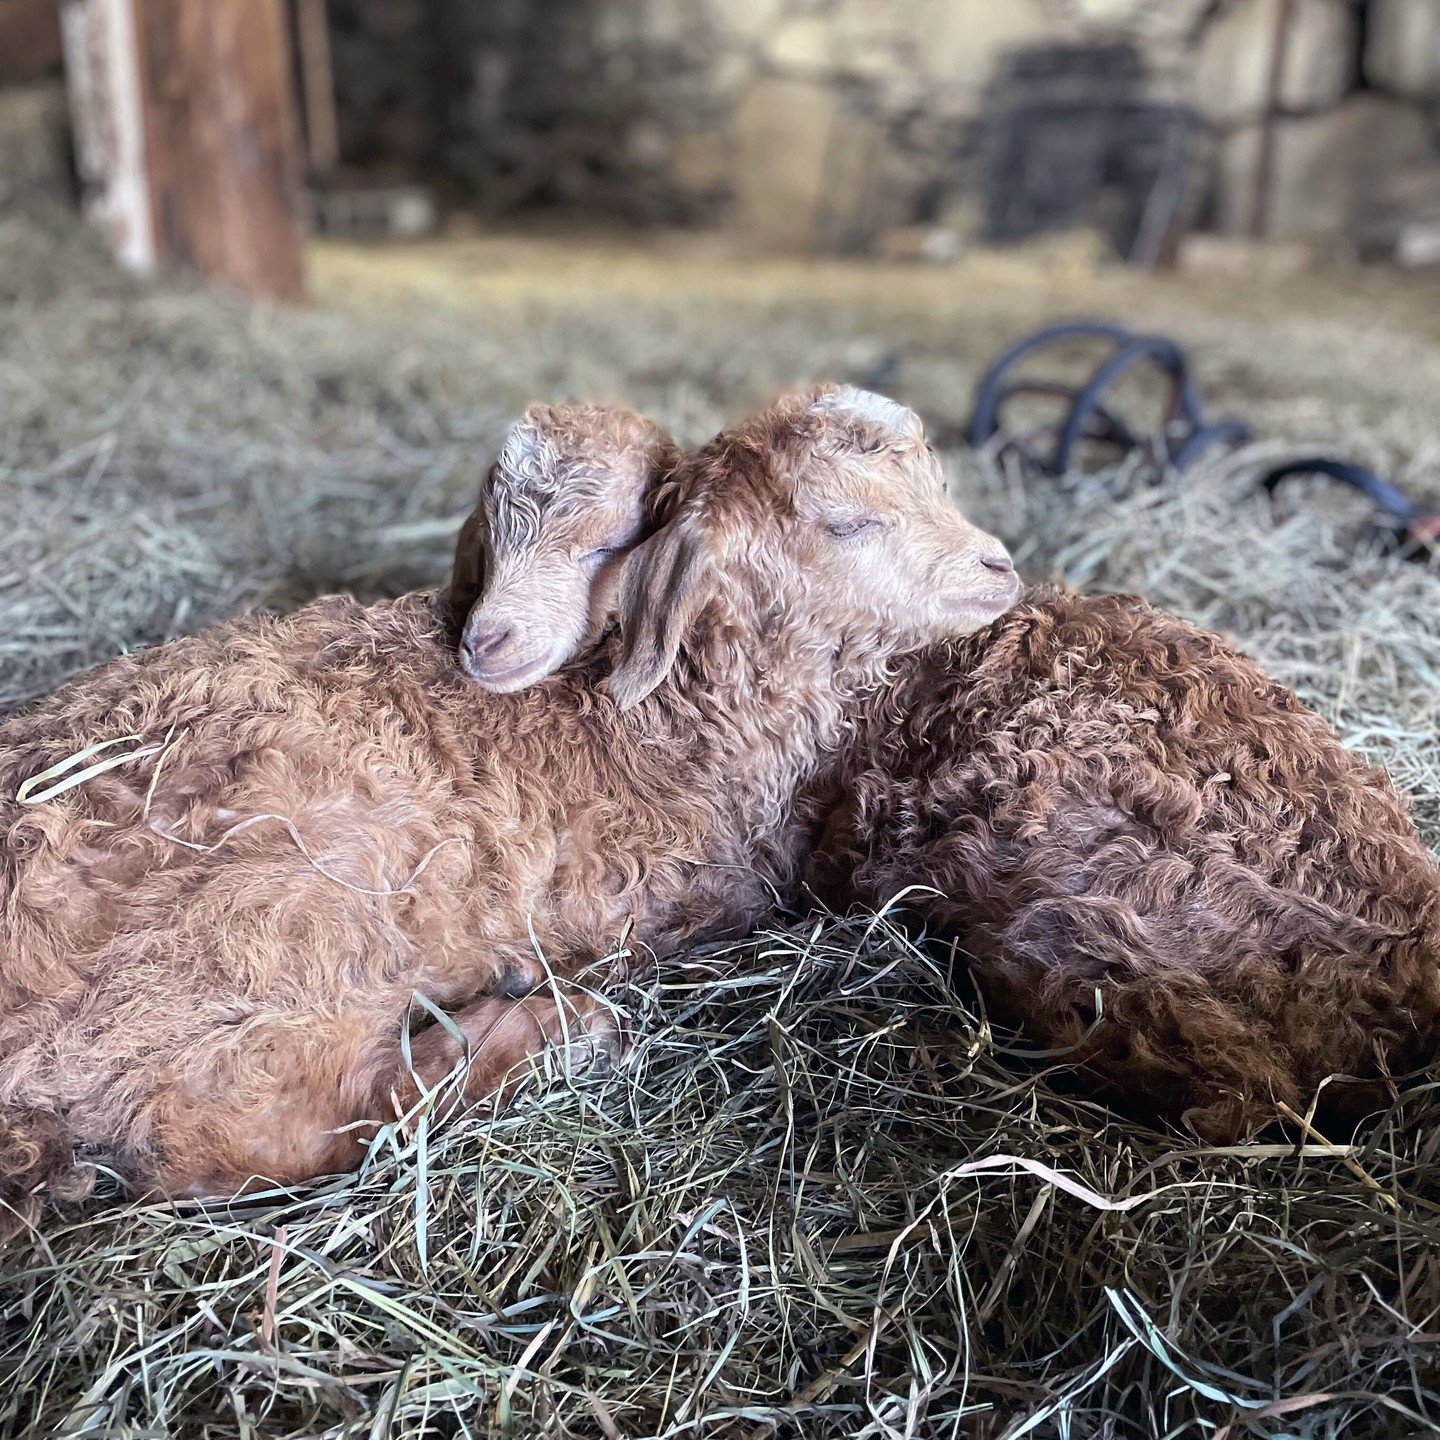 Who wants baby goat snuggle time? On Sat May 4 from 10-3, come to Cultivate Care Farms and hang out with our new goat babies. It's a Baby Goat Shower! There will be multiple pens set-up for kids and families to have hands-on time with the new friends